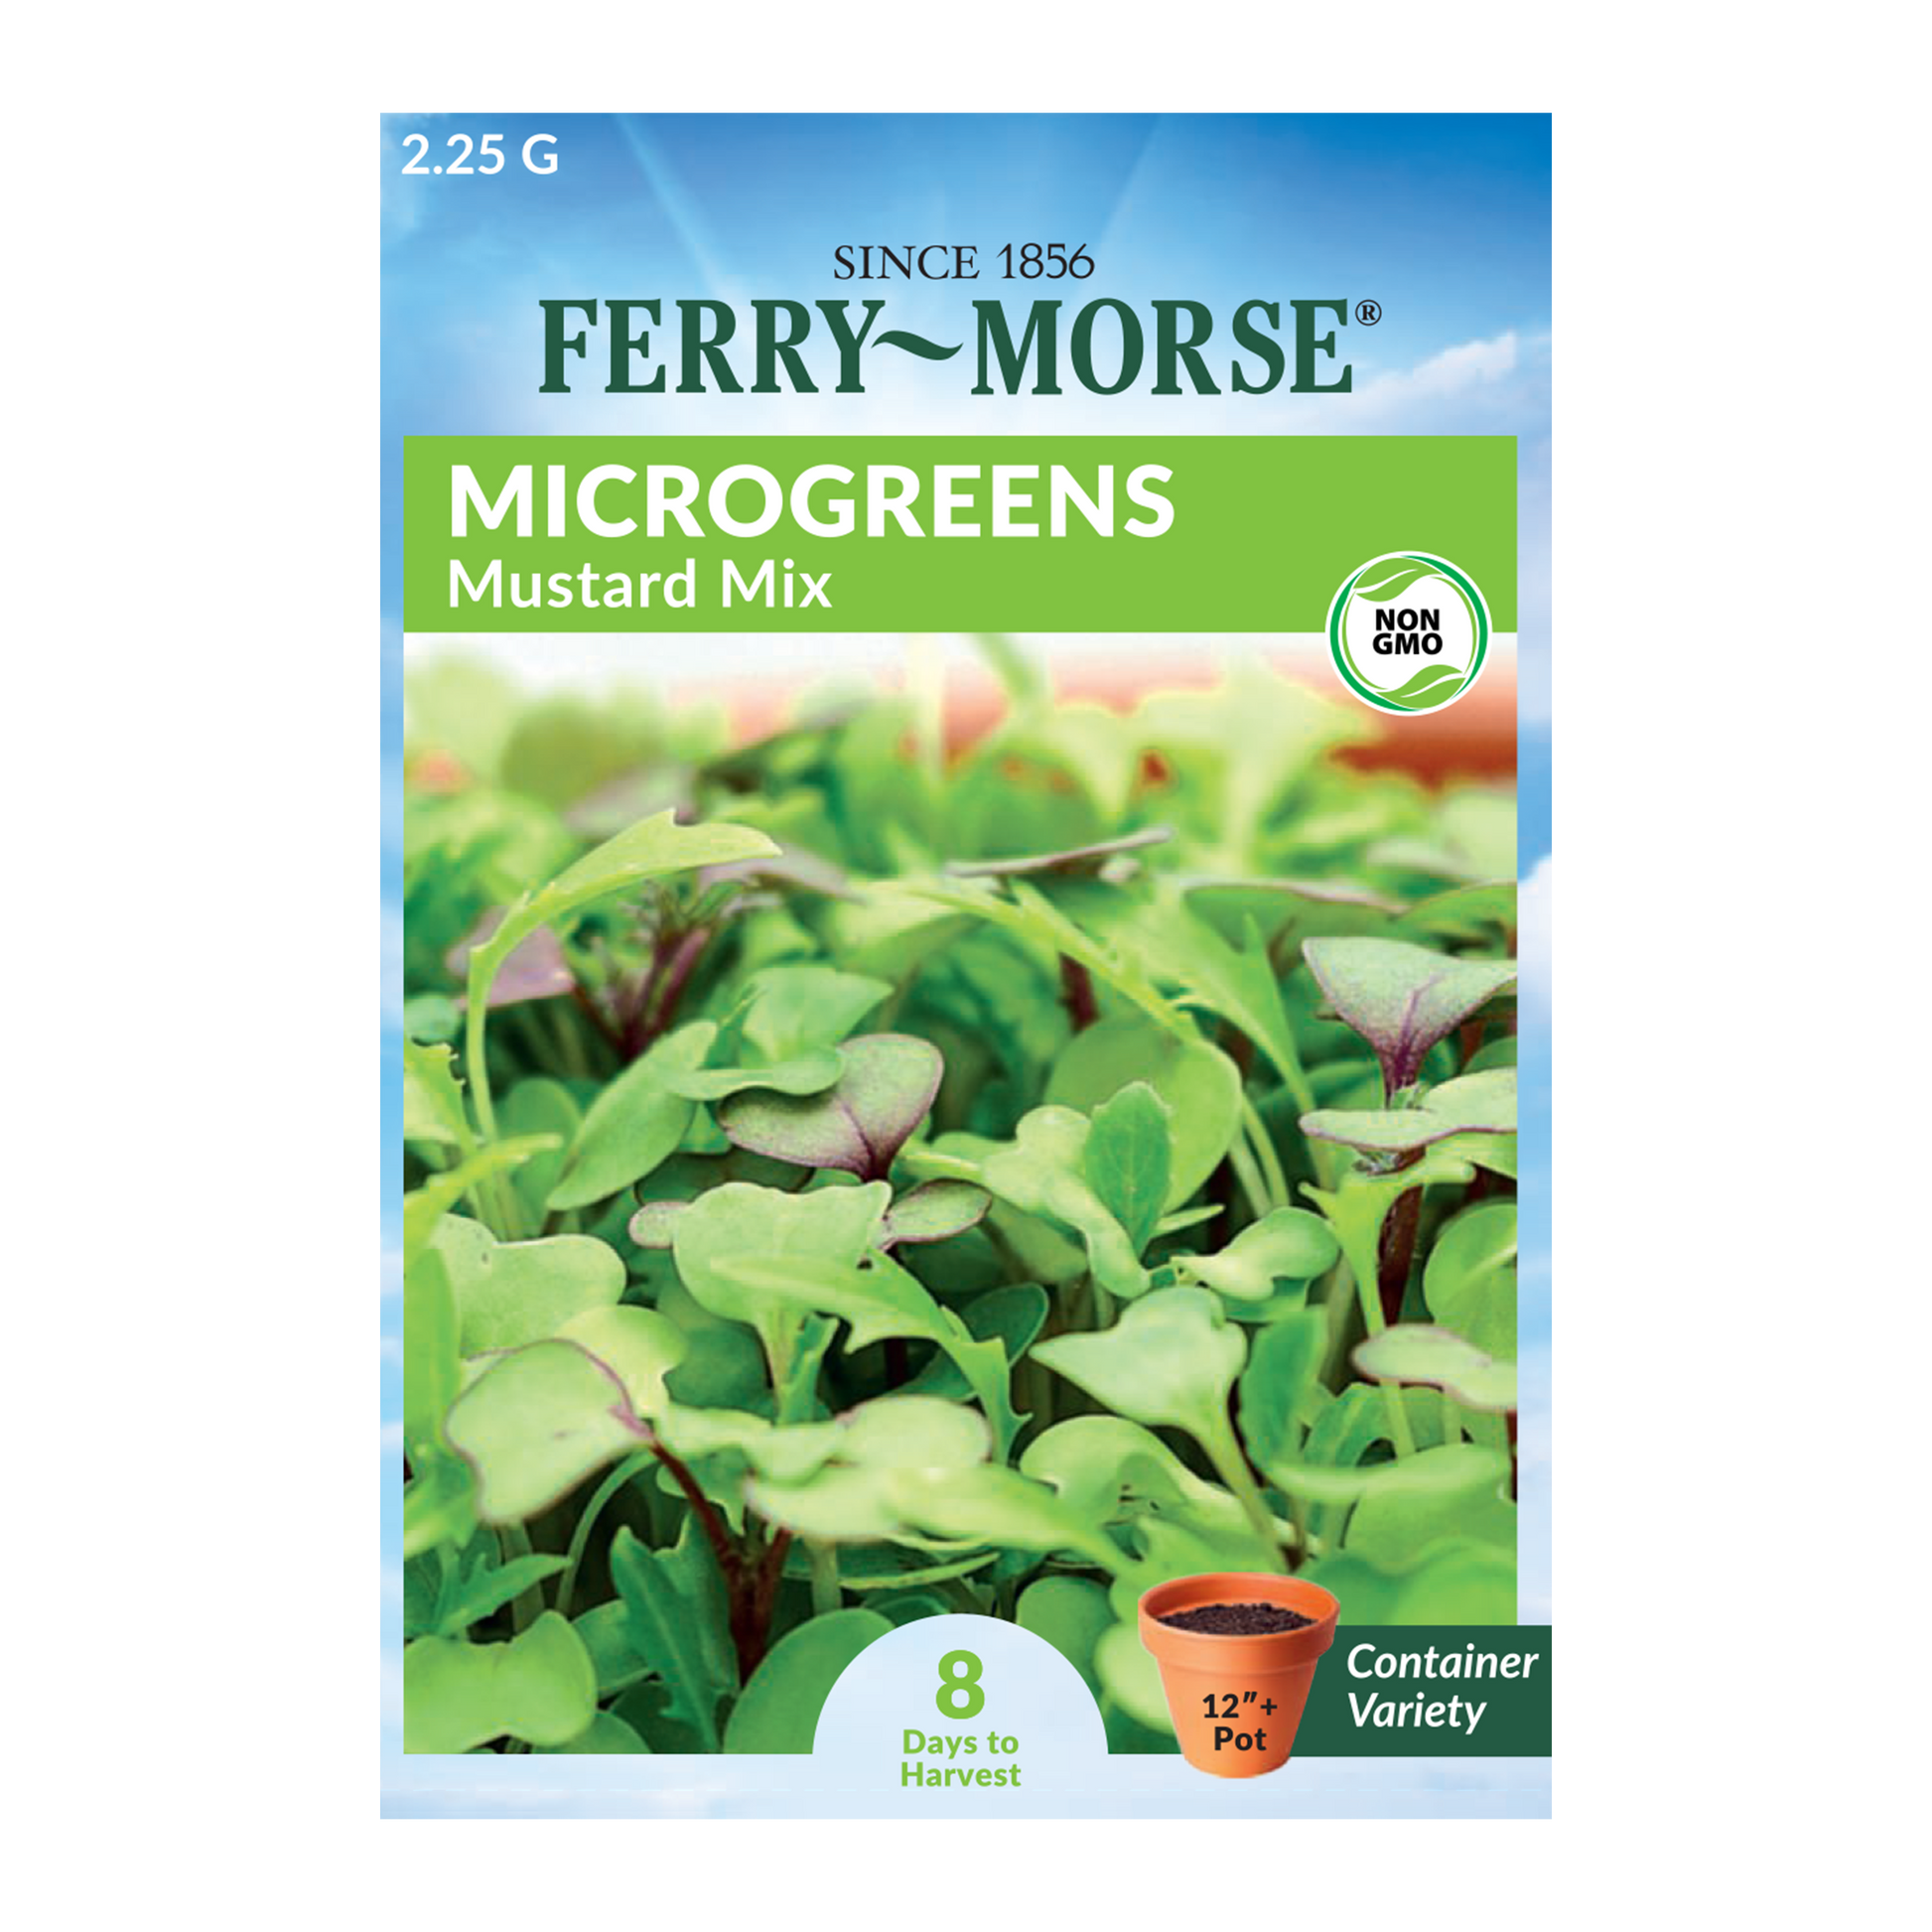 Mustard Braising Mix Microgreens Seeds_Front of microgreens packet_8 Days to Harvest